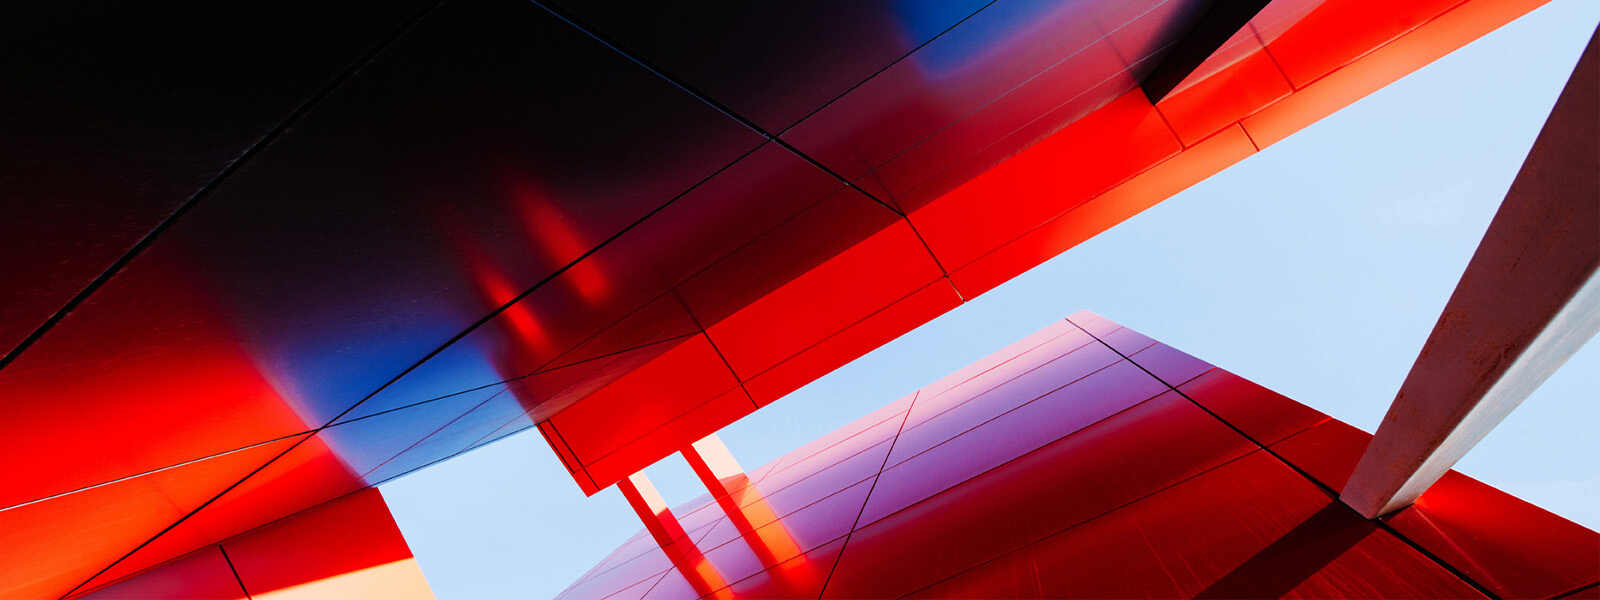 Angular view of colorful building